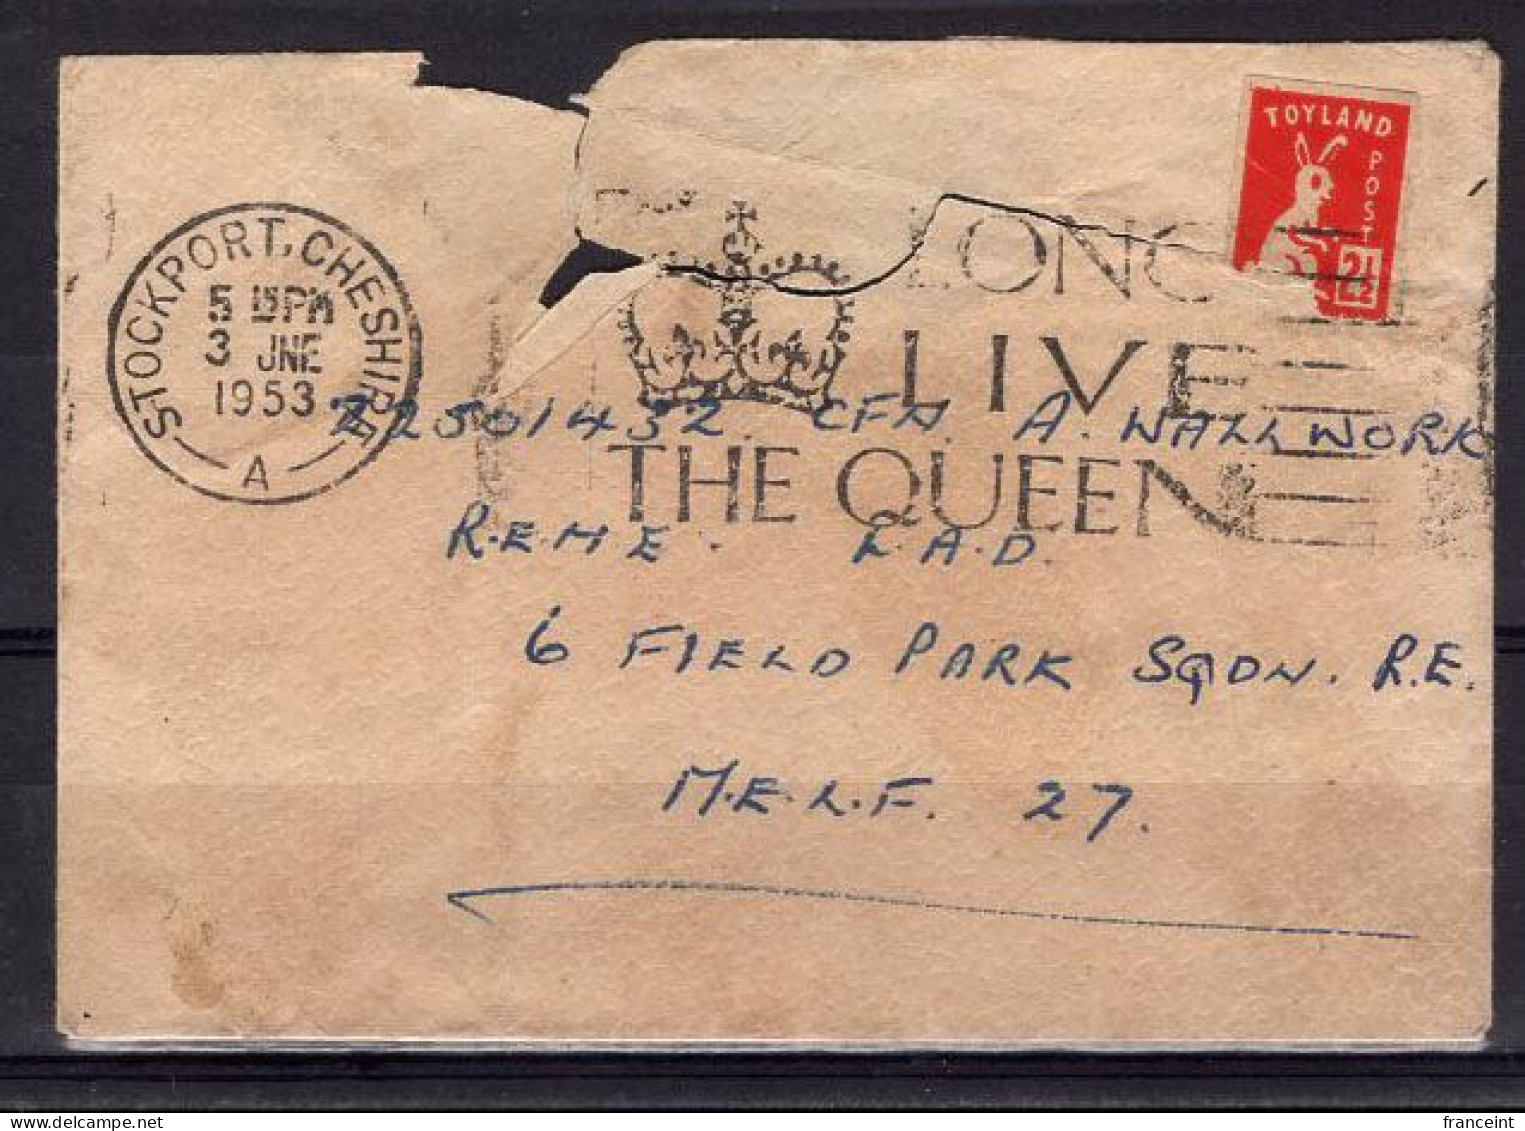 GREAT BRITAIN(1953) Rabbit. Miniature Envelope Franked With (damaged) 2-1/2 TOYLAND POST Stamp Showing Picture Of A Baby - Cinderella